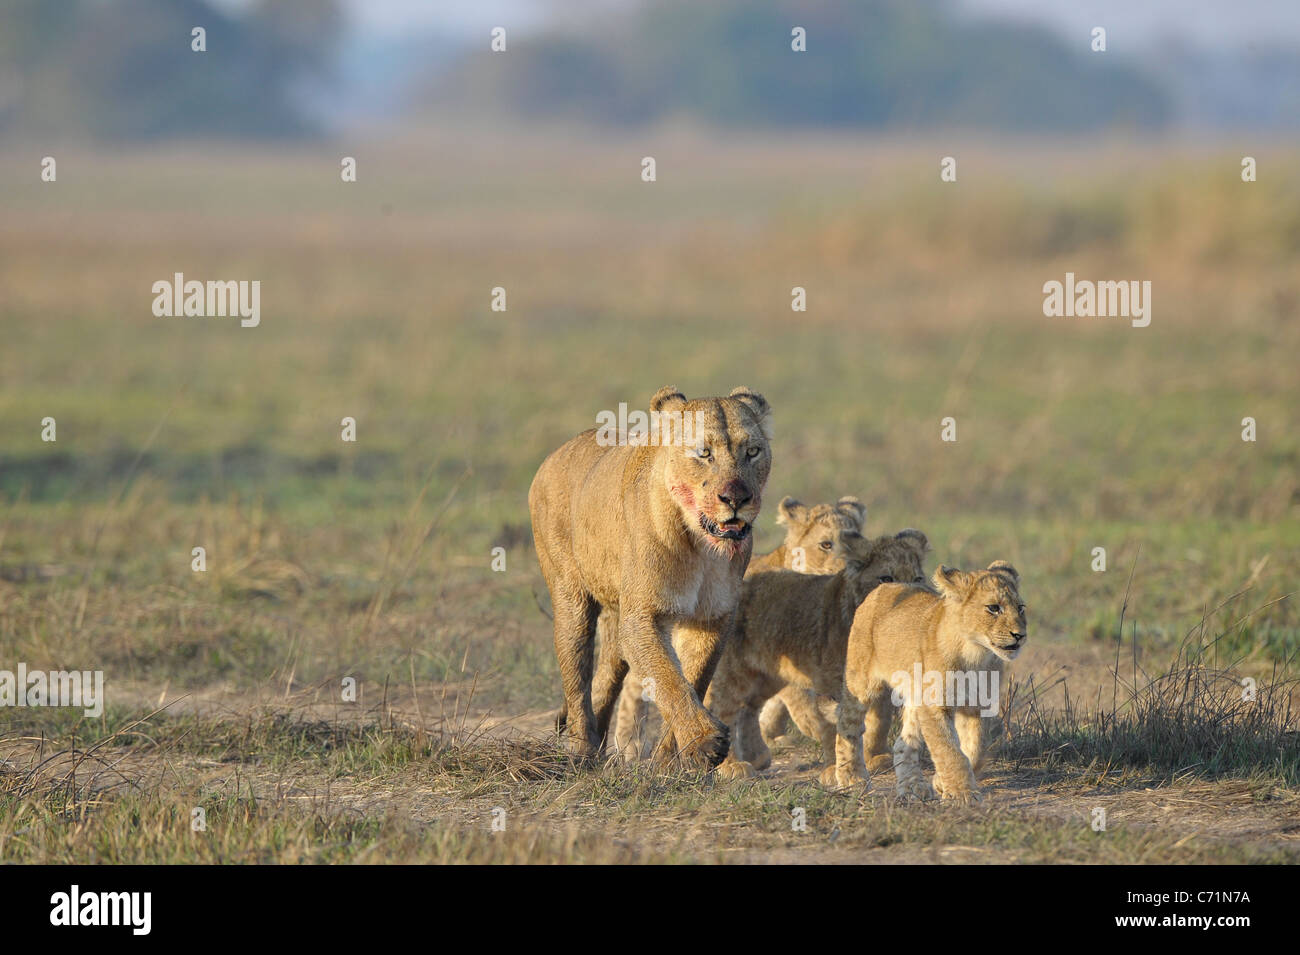 Lioness after hunting with cubs. The lioness with a blood-stained muzzle has returned from hunting to the kids to young lions. Stock Photo